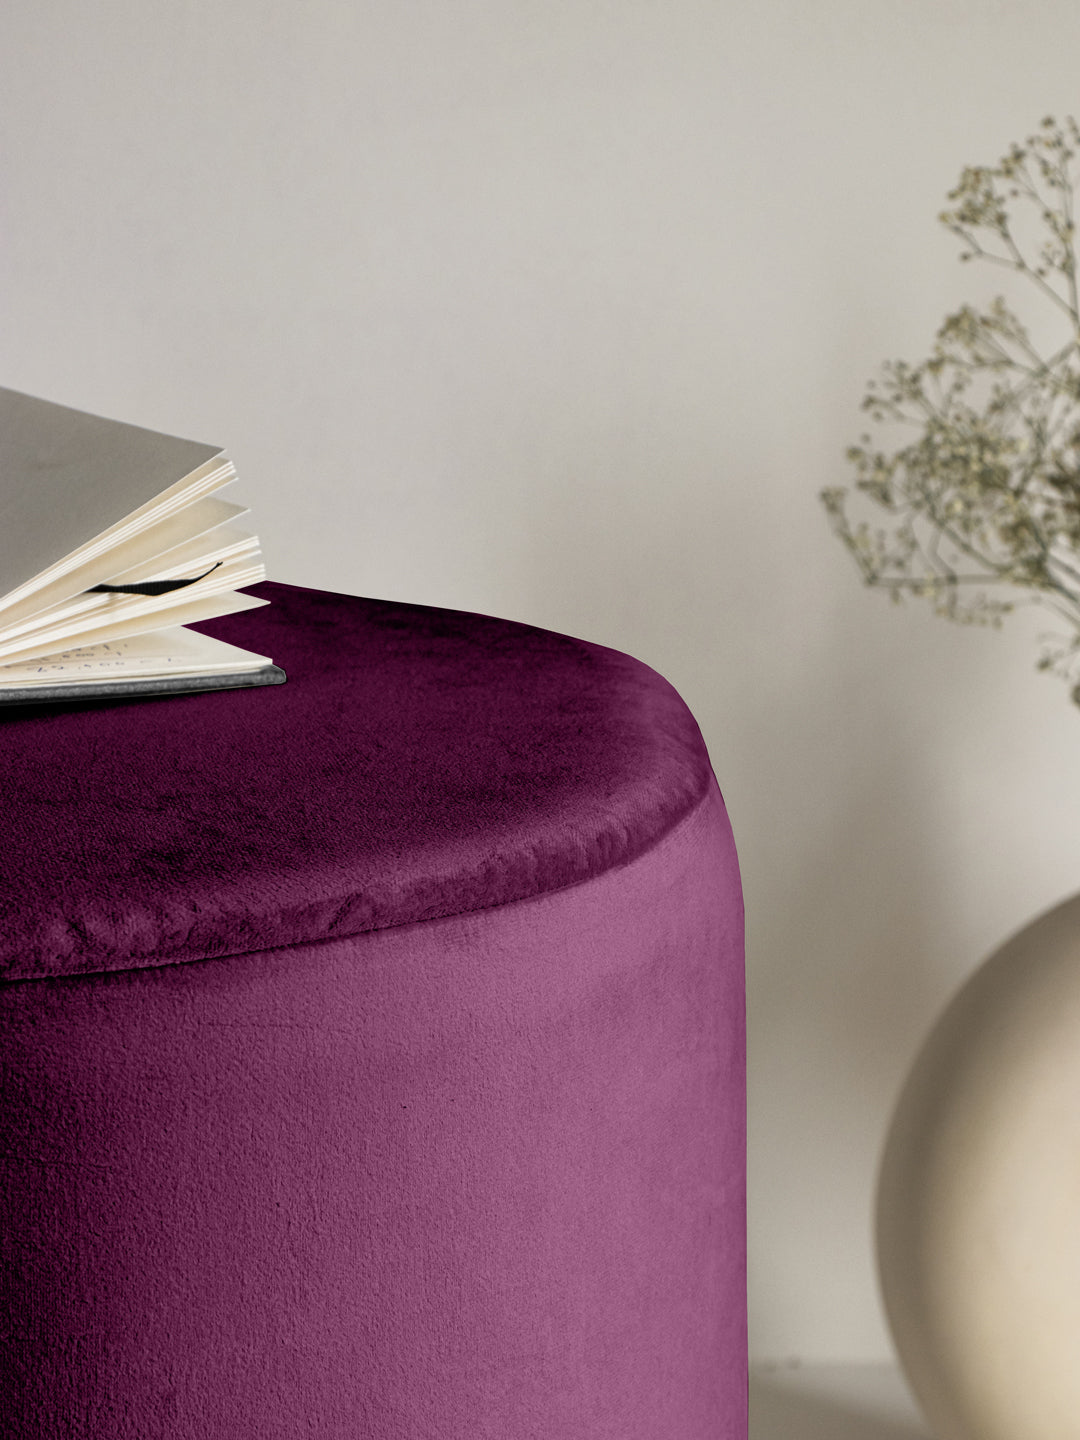 Suede Grape Purple Stool With Gold Rings